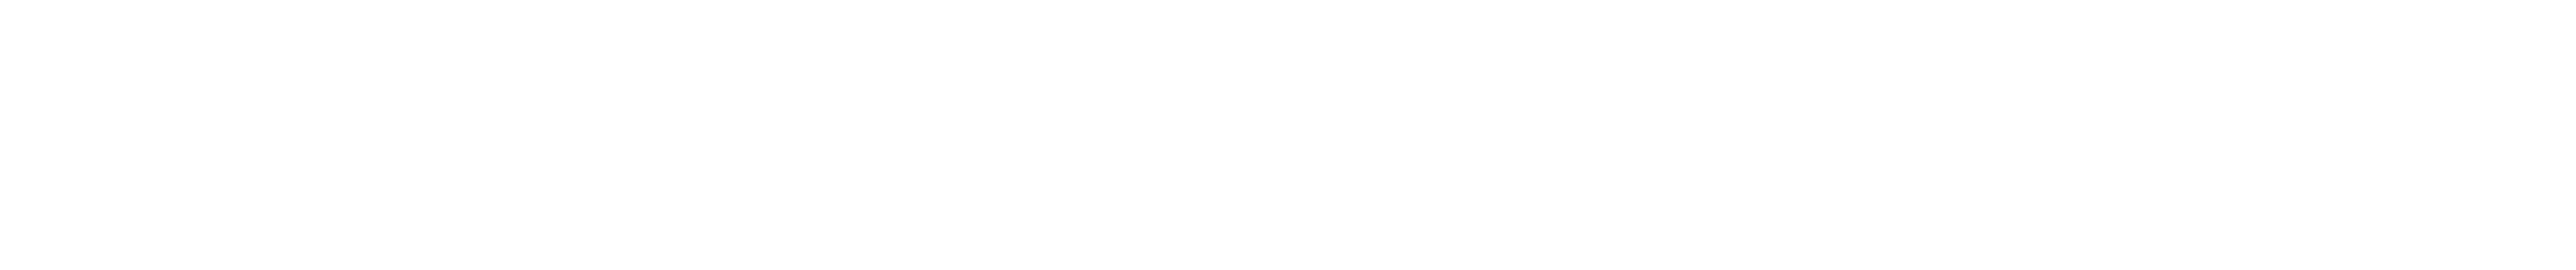 On Prism Records